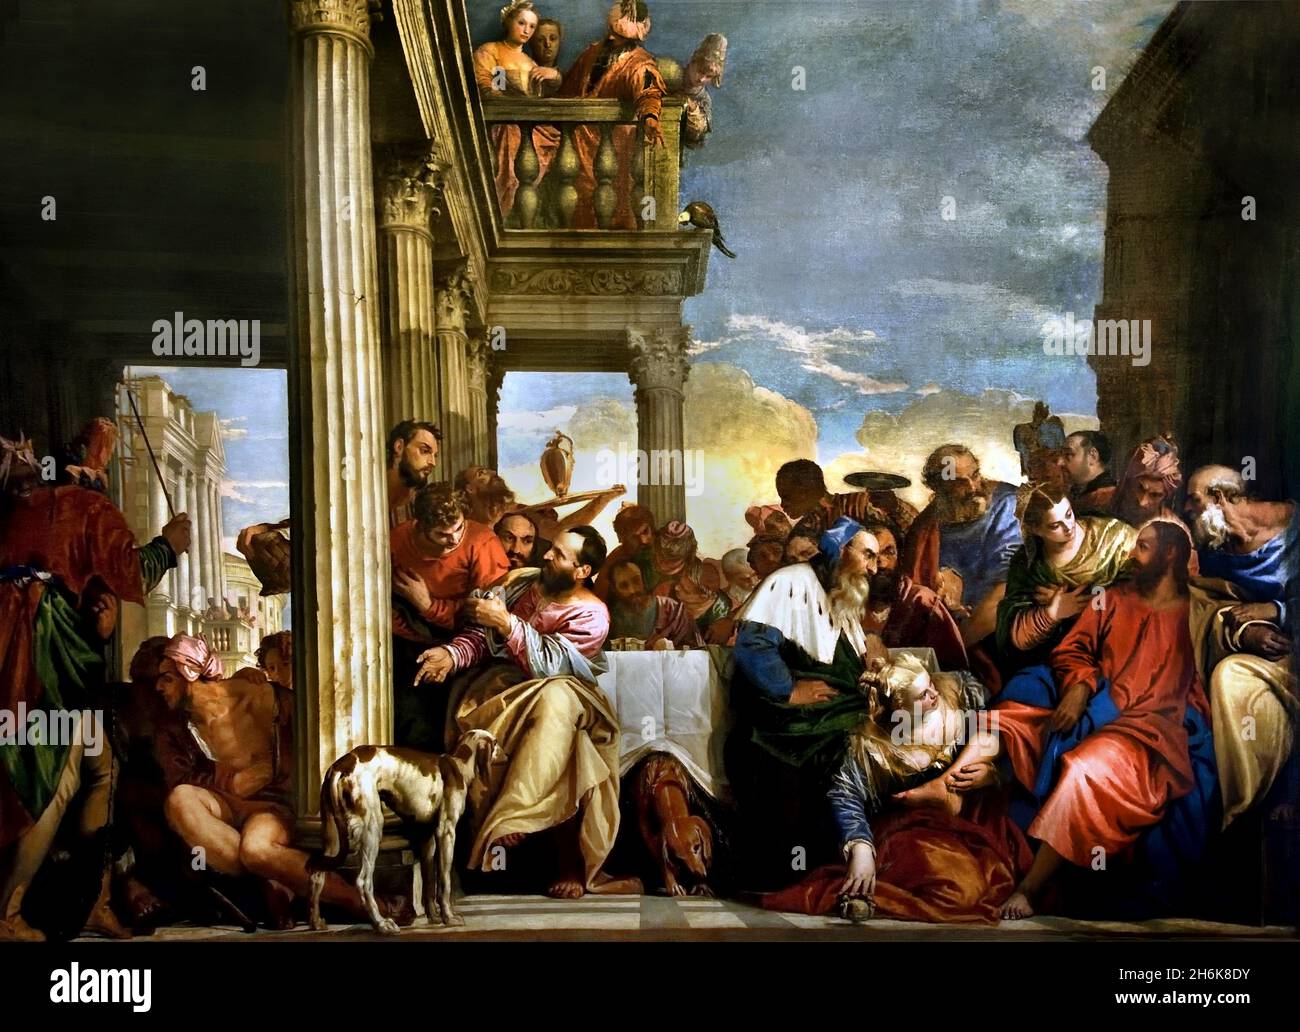 Dinner at the house of Simon the Pharisee 1555 - 1556 Caliari Paolo known as Paolo Veronese, 1528/ 1588 Italy, Italian, ( Simon, was a, Pharisee ,mentioned in the Gospel of Luke as the host of a meal, who invited ,Jesus to eat in his house, but failed to show him ,the usual marks of hospitality offered to visitors, a greeting kiss , water to wash his feet , or oil for his head ) Stock Photo